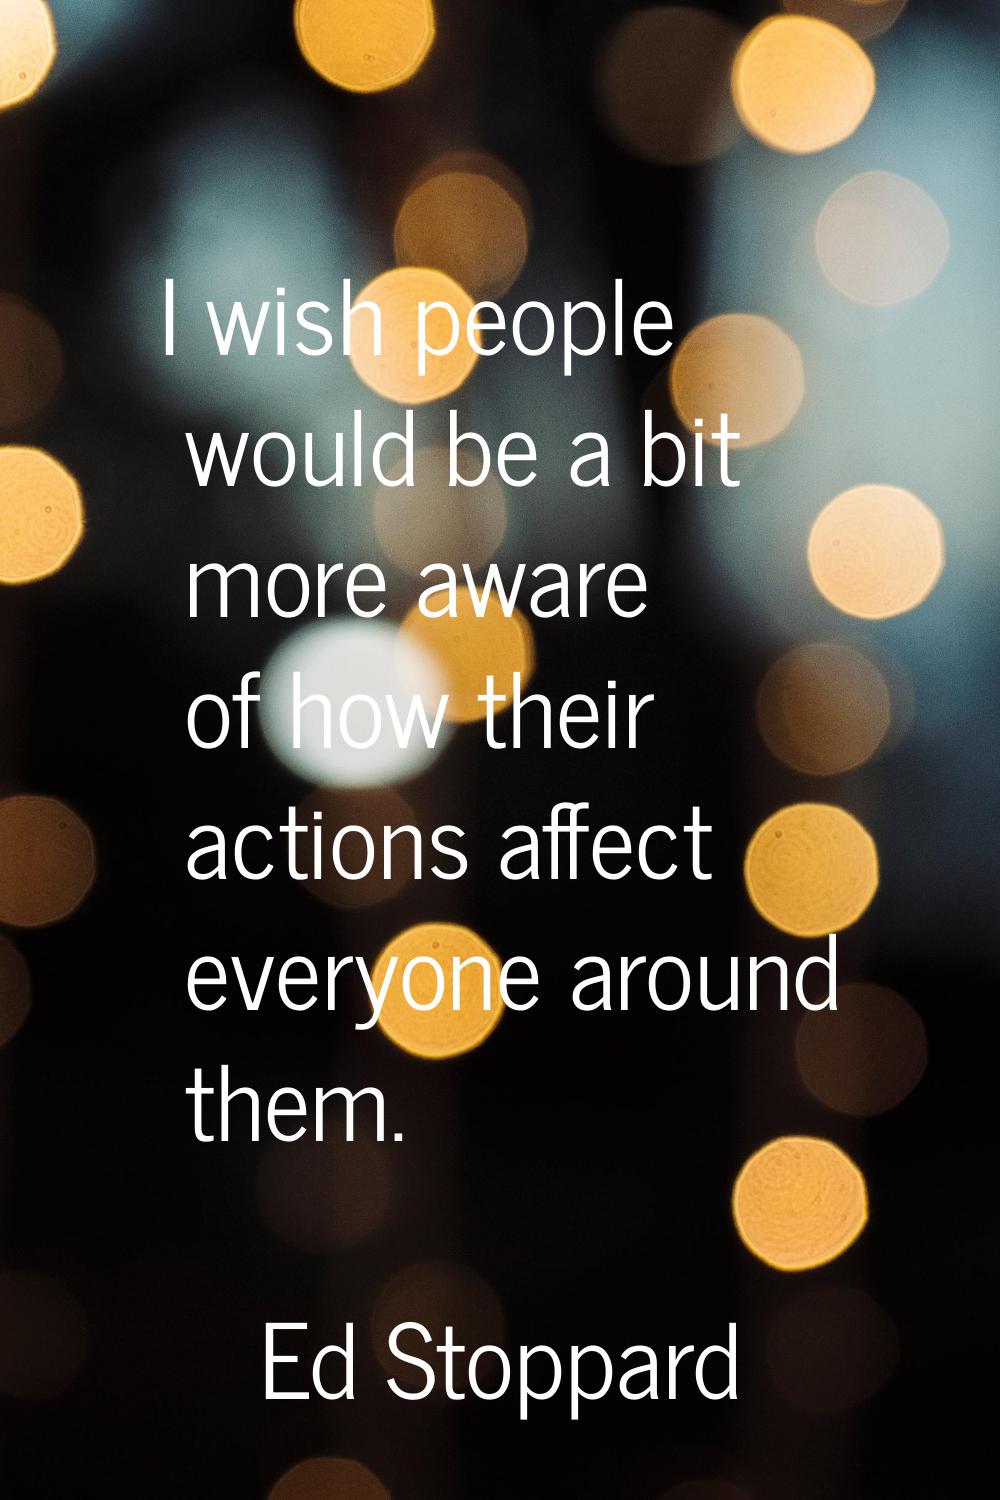 I wish people would be a bit more aware of how their actions affect everyone around them.